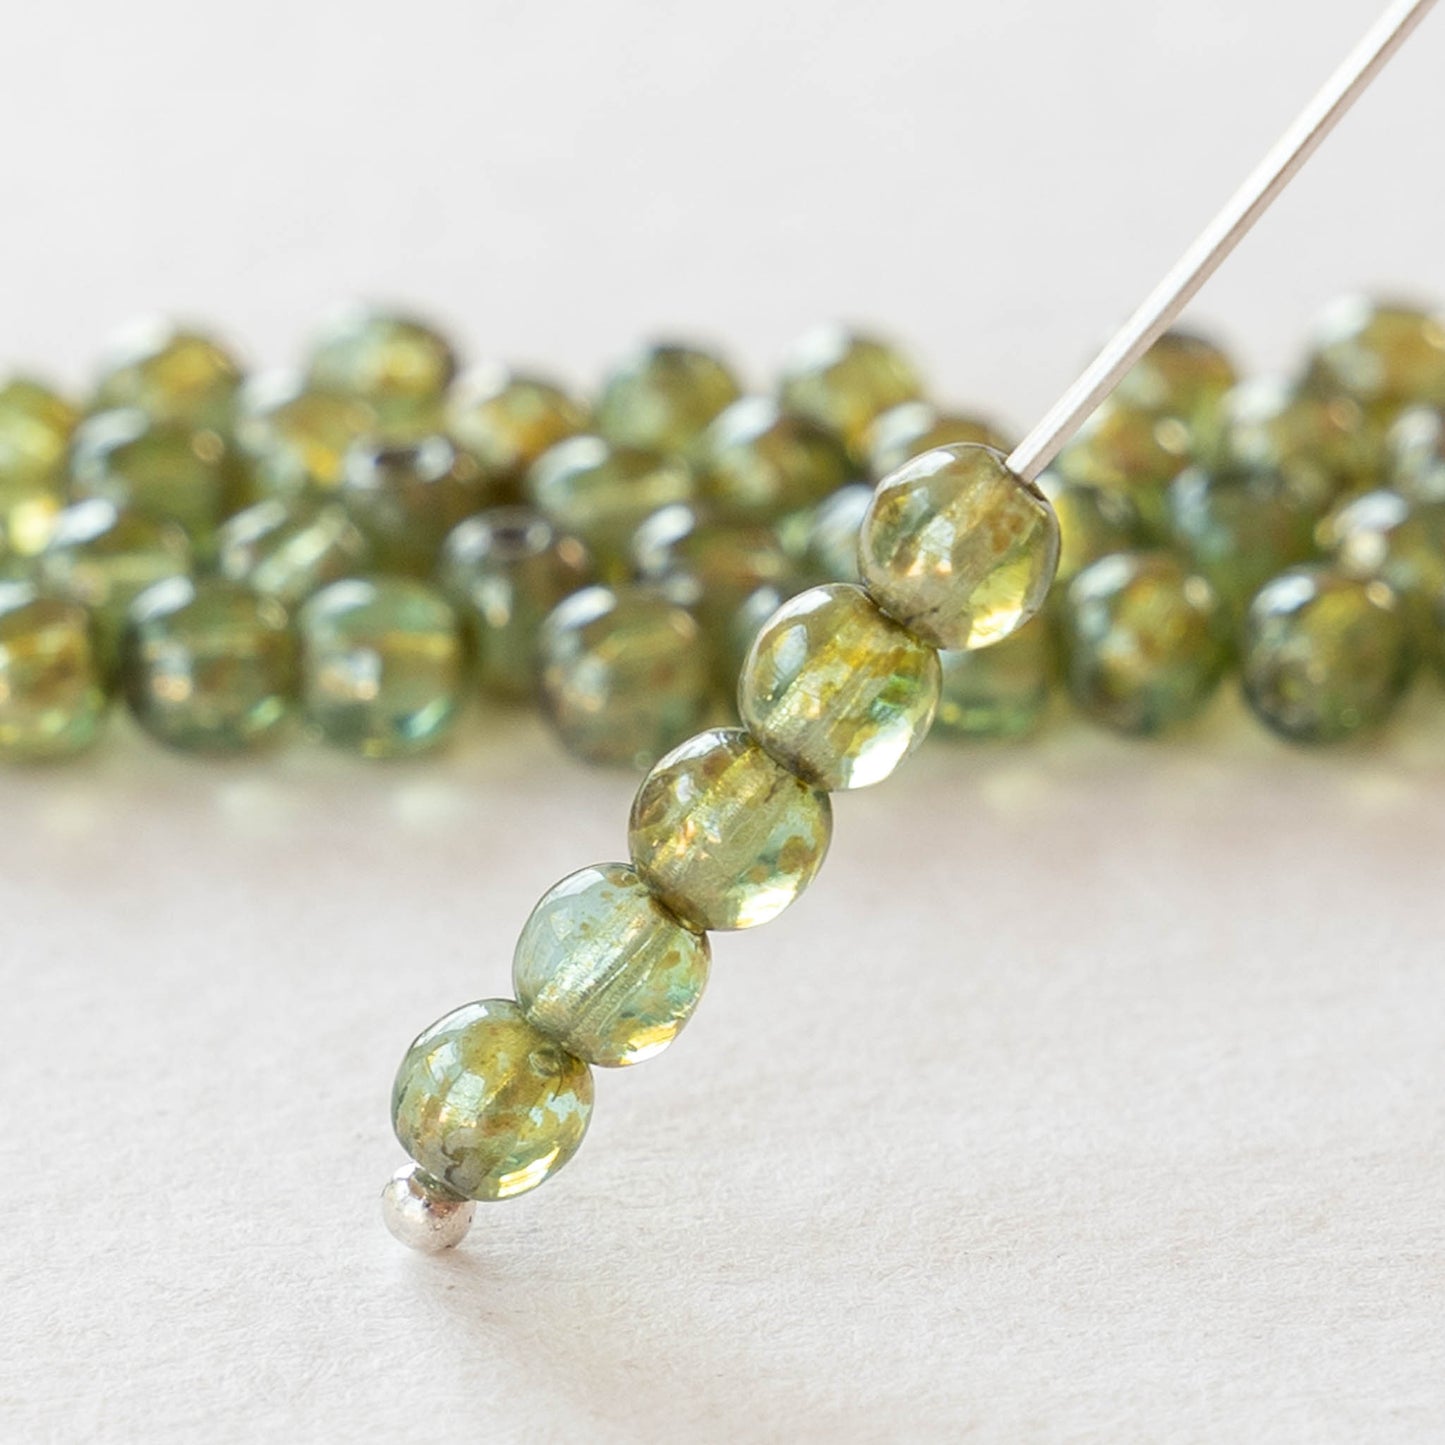 4mm Round Glass Beads - Sage with Picasso Finish - 50 Beads